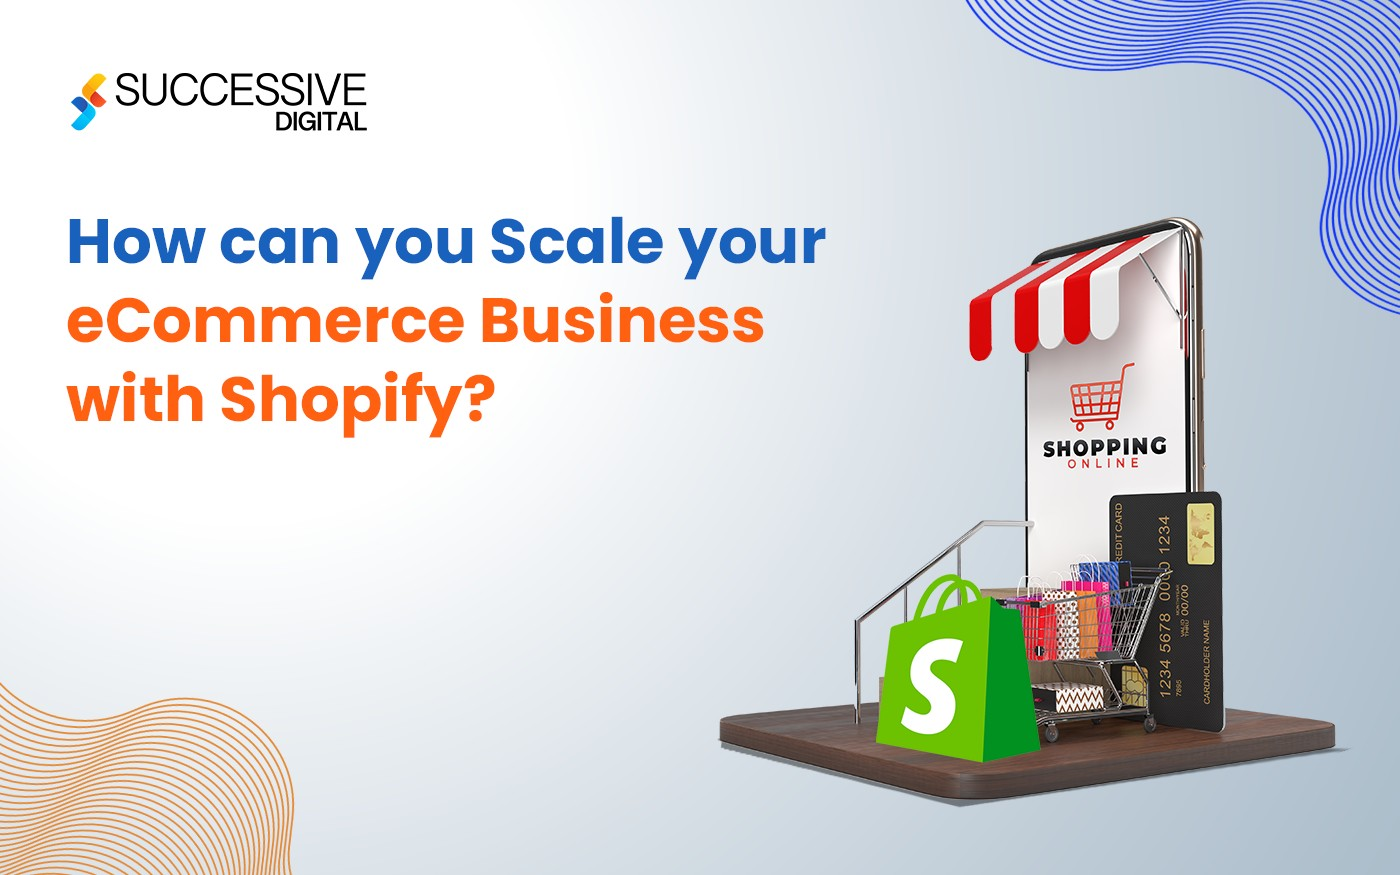 How Can You Scale Your eCommerce Business With Shopify?